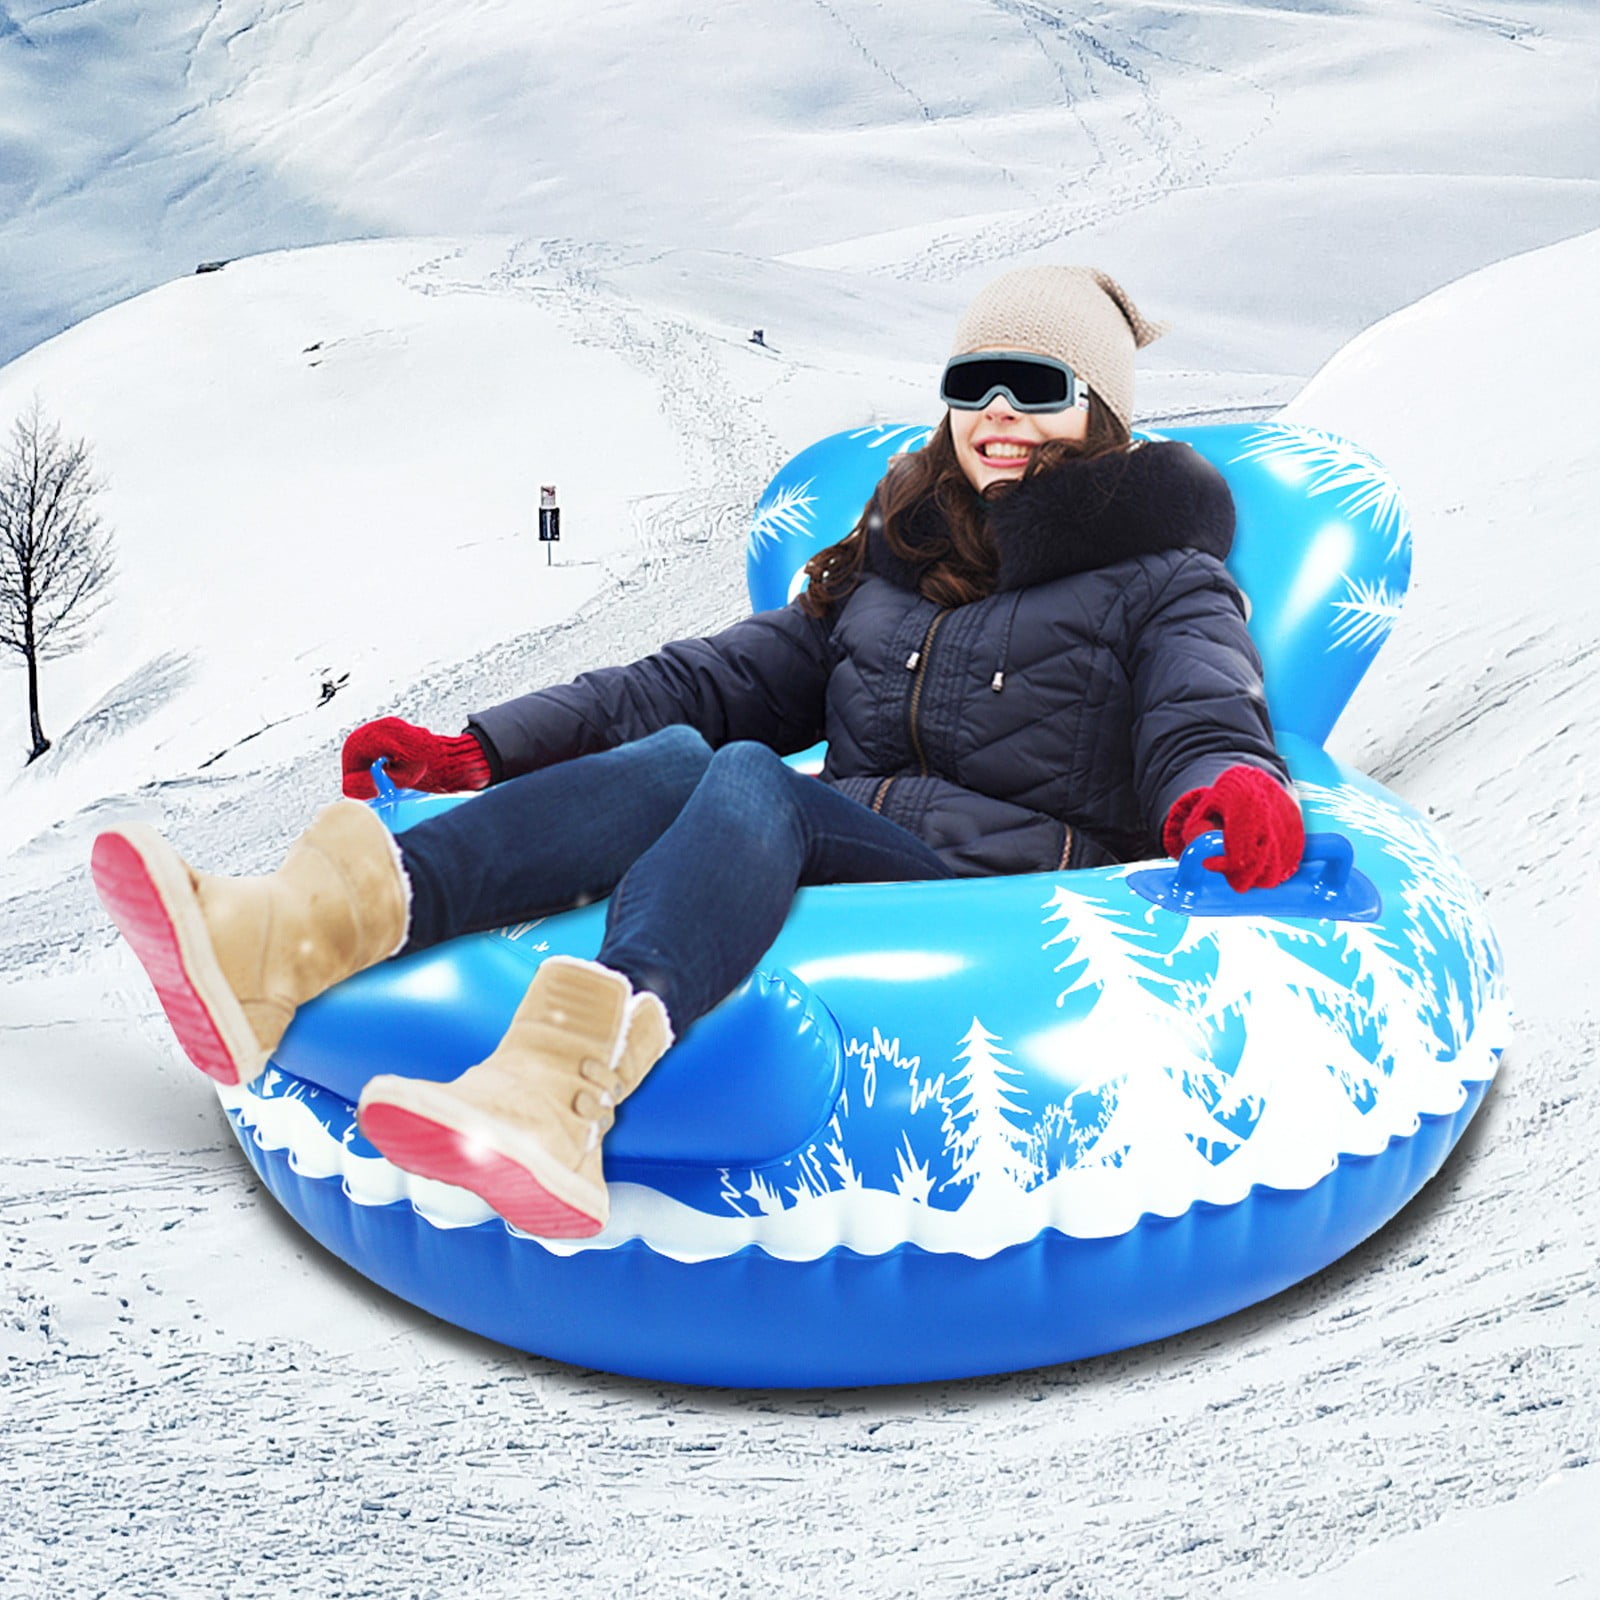 Details about   Inflatable Snow Tubes Sledding Winter Heavy Duty Snow Sleds For Kids Adults 